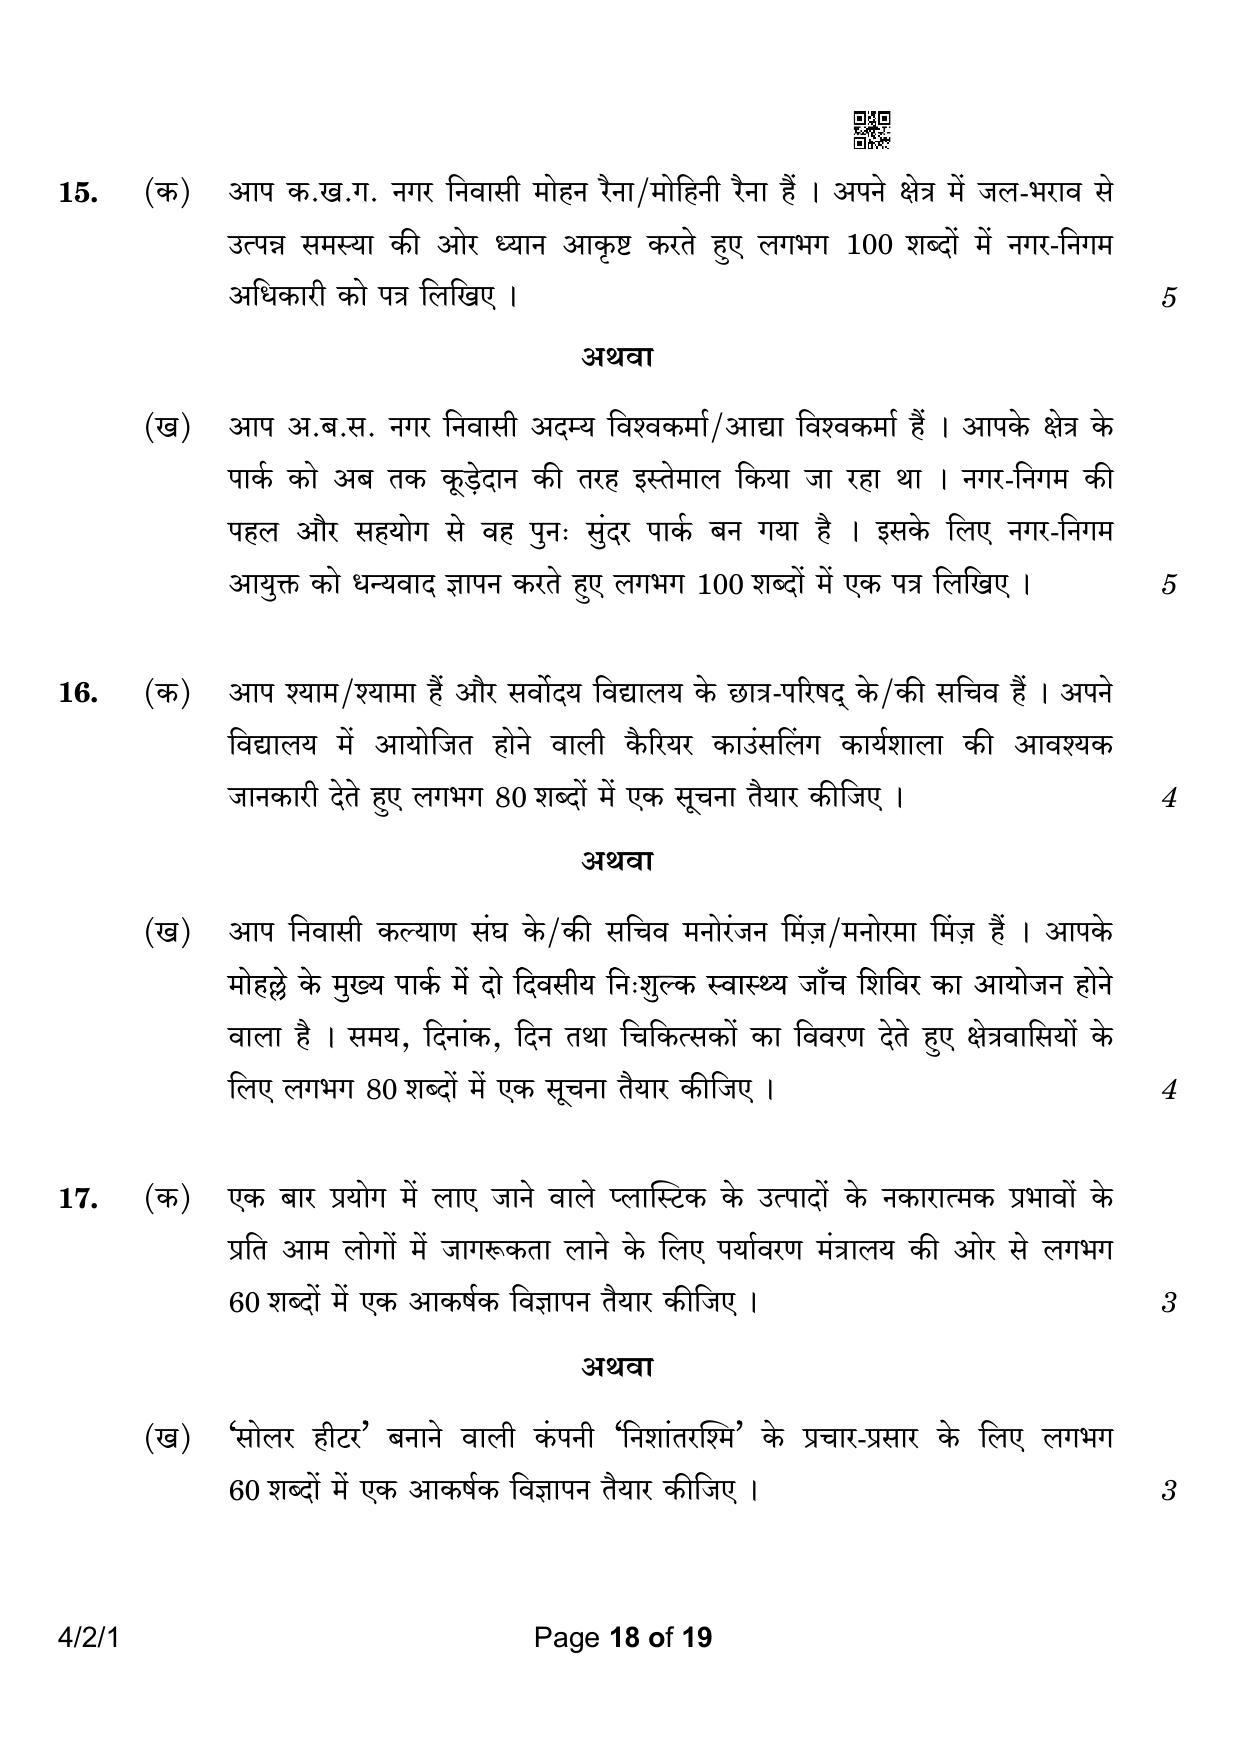 CBSE Class 10 4-2-1 Hindi B 2023 Question Paper - Page 18